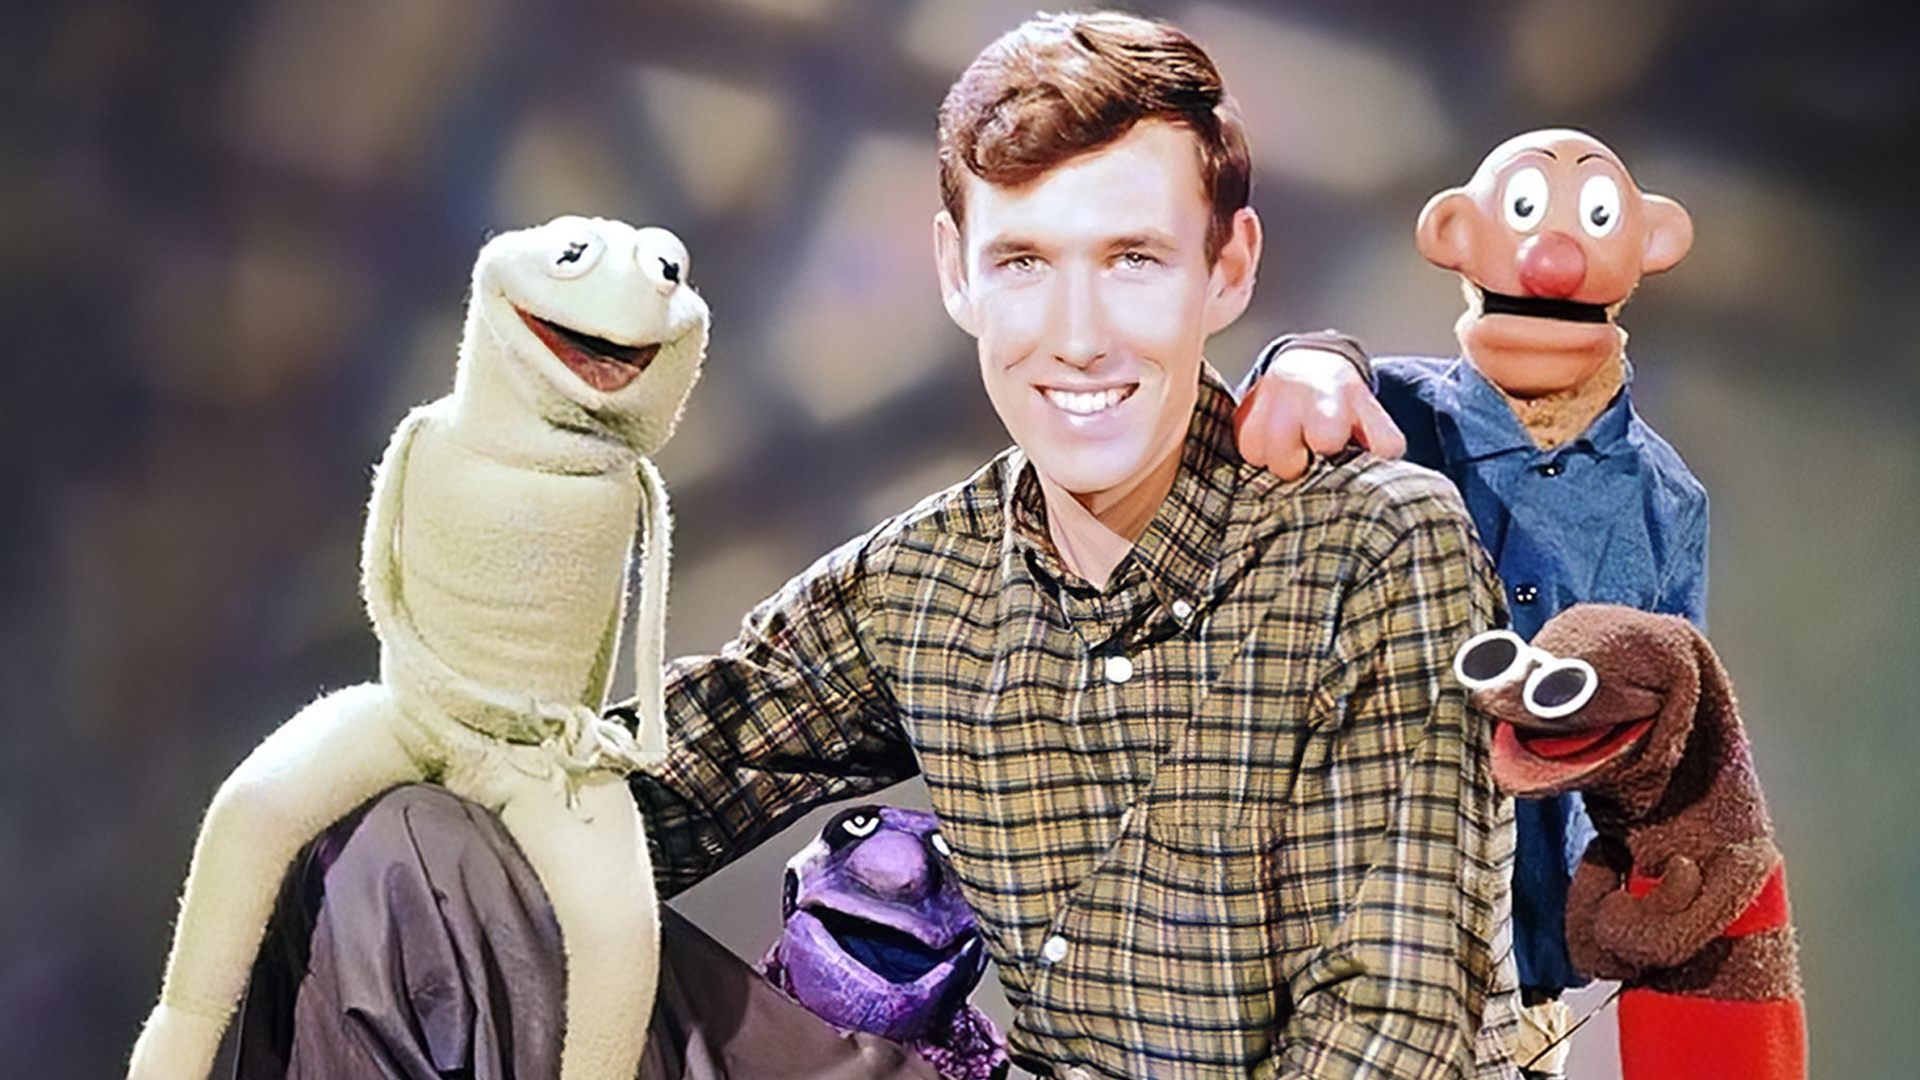 Biopic About Jim Henson in the Works at Disney